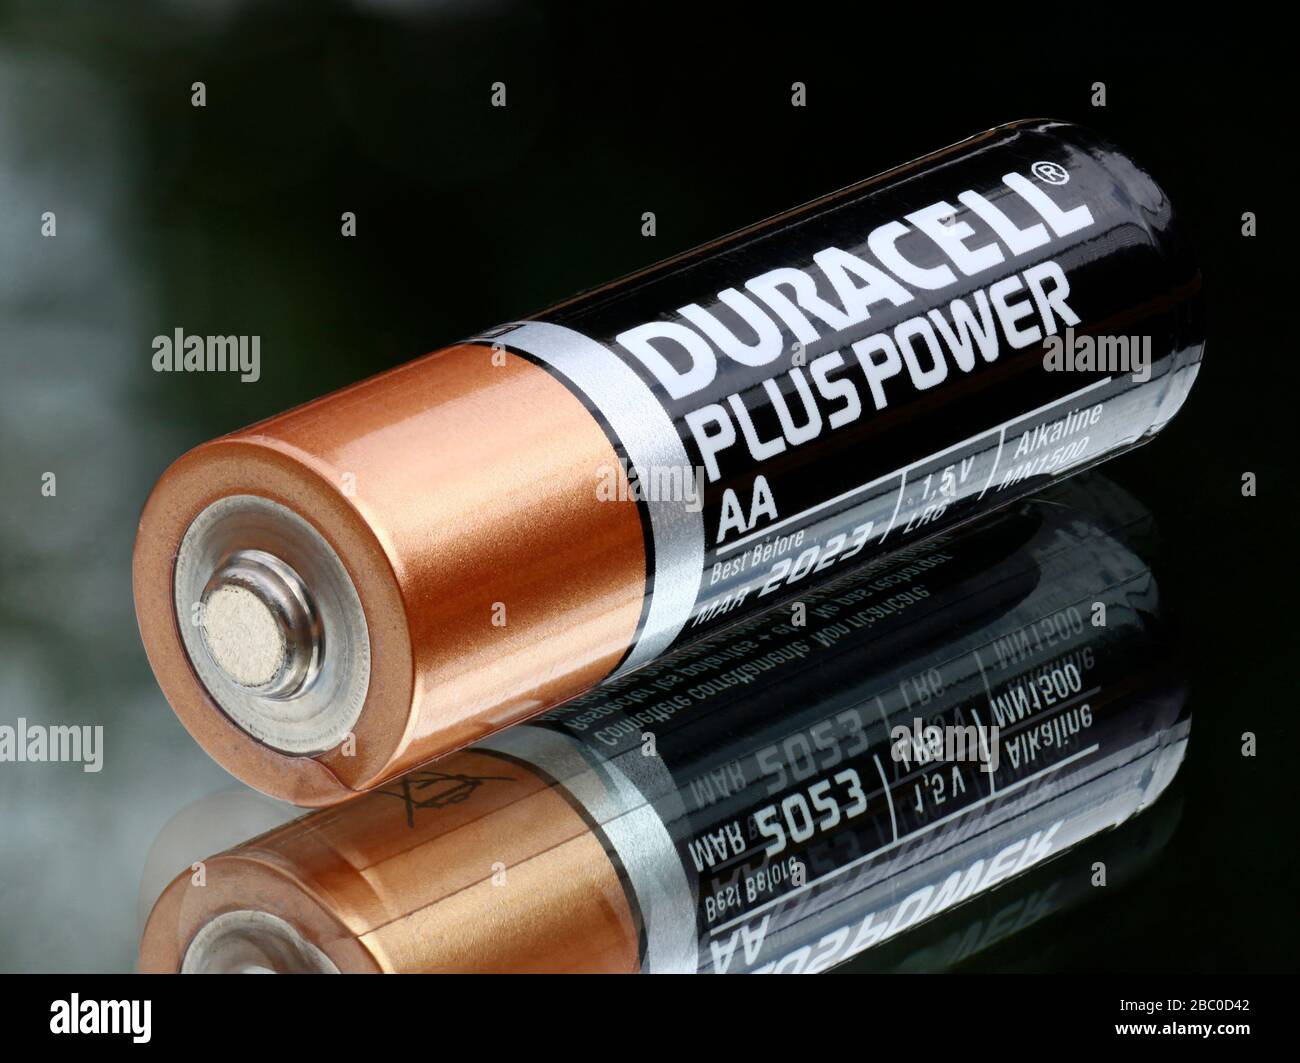 1.5V LR4 AA alkaline battery made by Duracell, now owned by Berkshire  Hathaway after Warren Buffett agreed a share swap with the previous owner  Stock Photo - Alamy